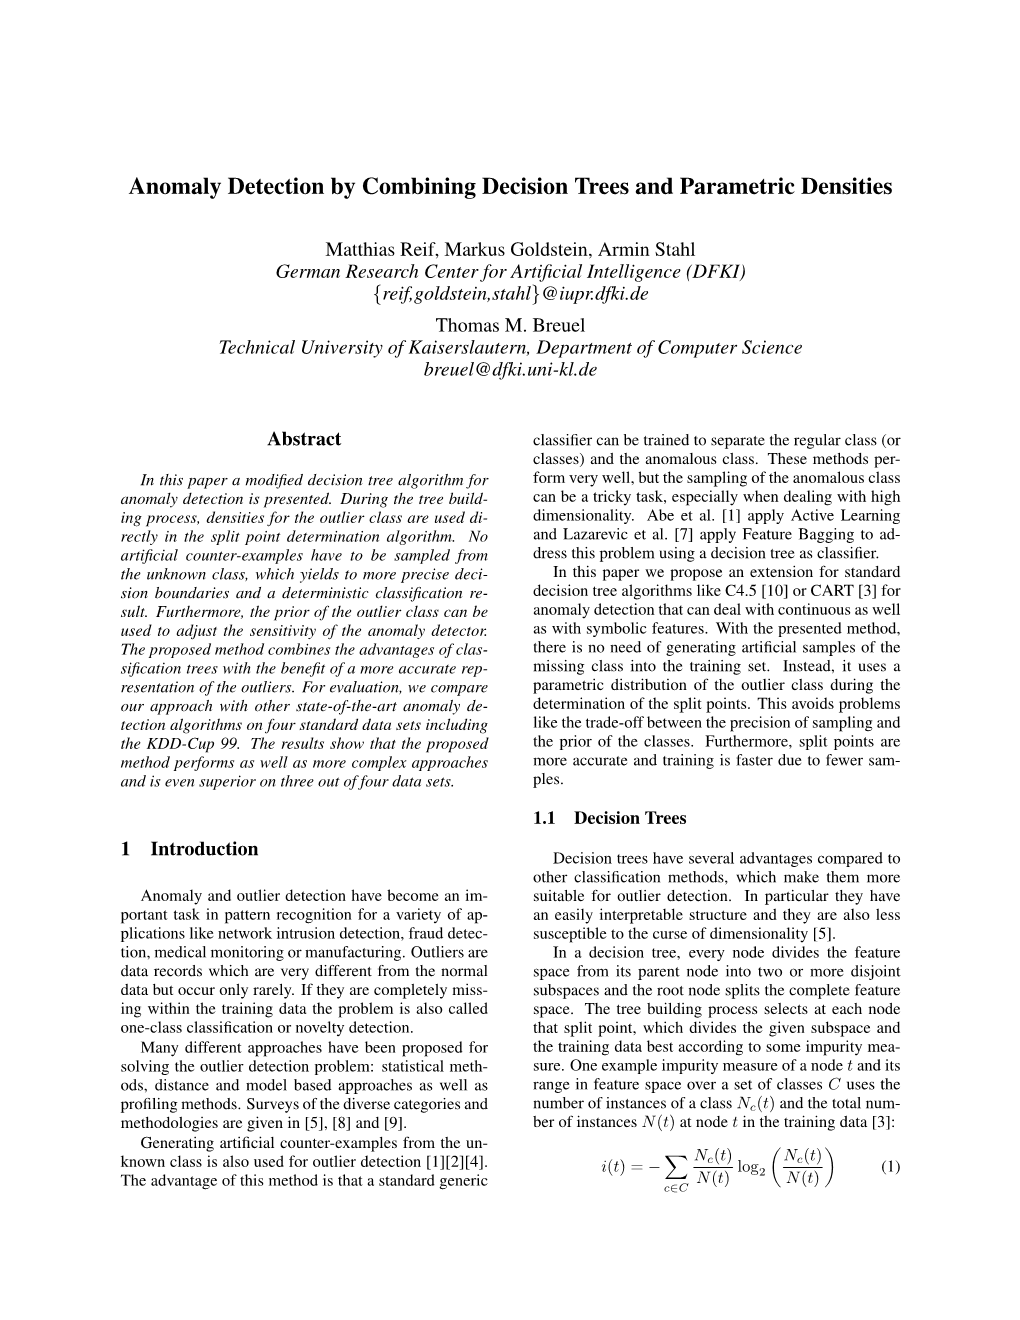 Anomaly Detection by Combining Decision Trees and Parametric Densities